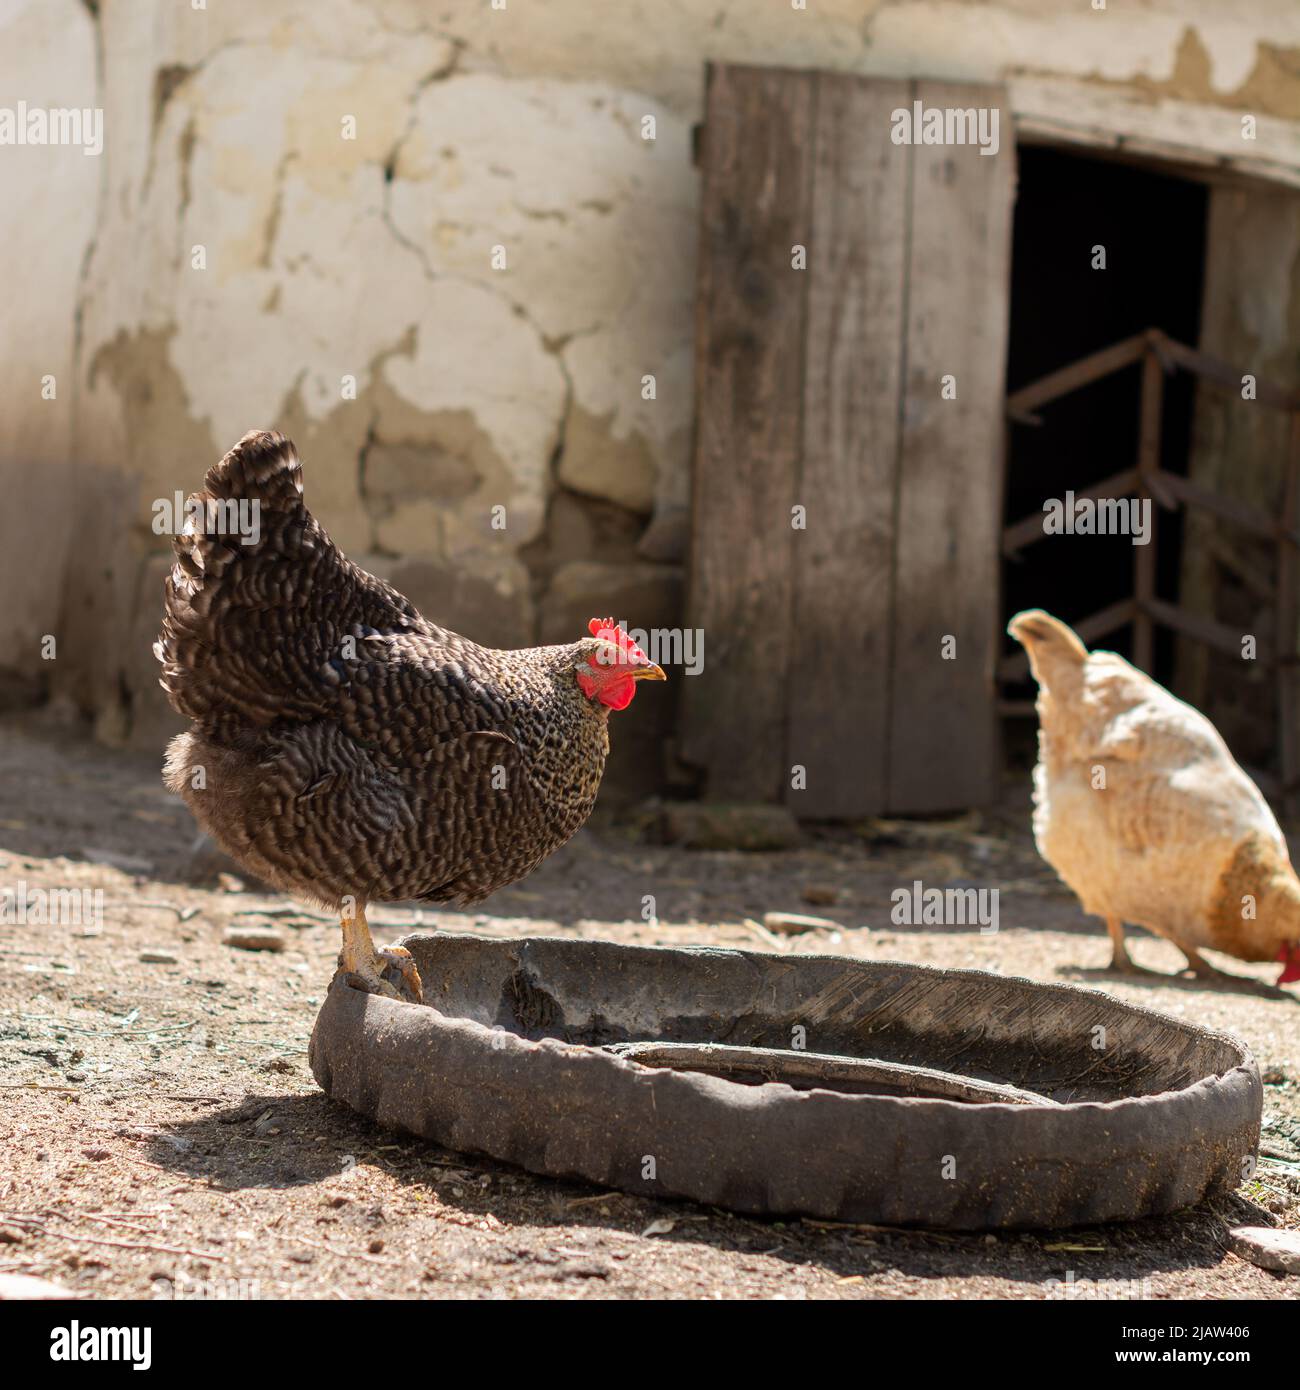 The Plymouth Rock chicken is standing on a poultry drinker made of an old tyre cut in half. Stock Photo